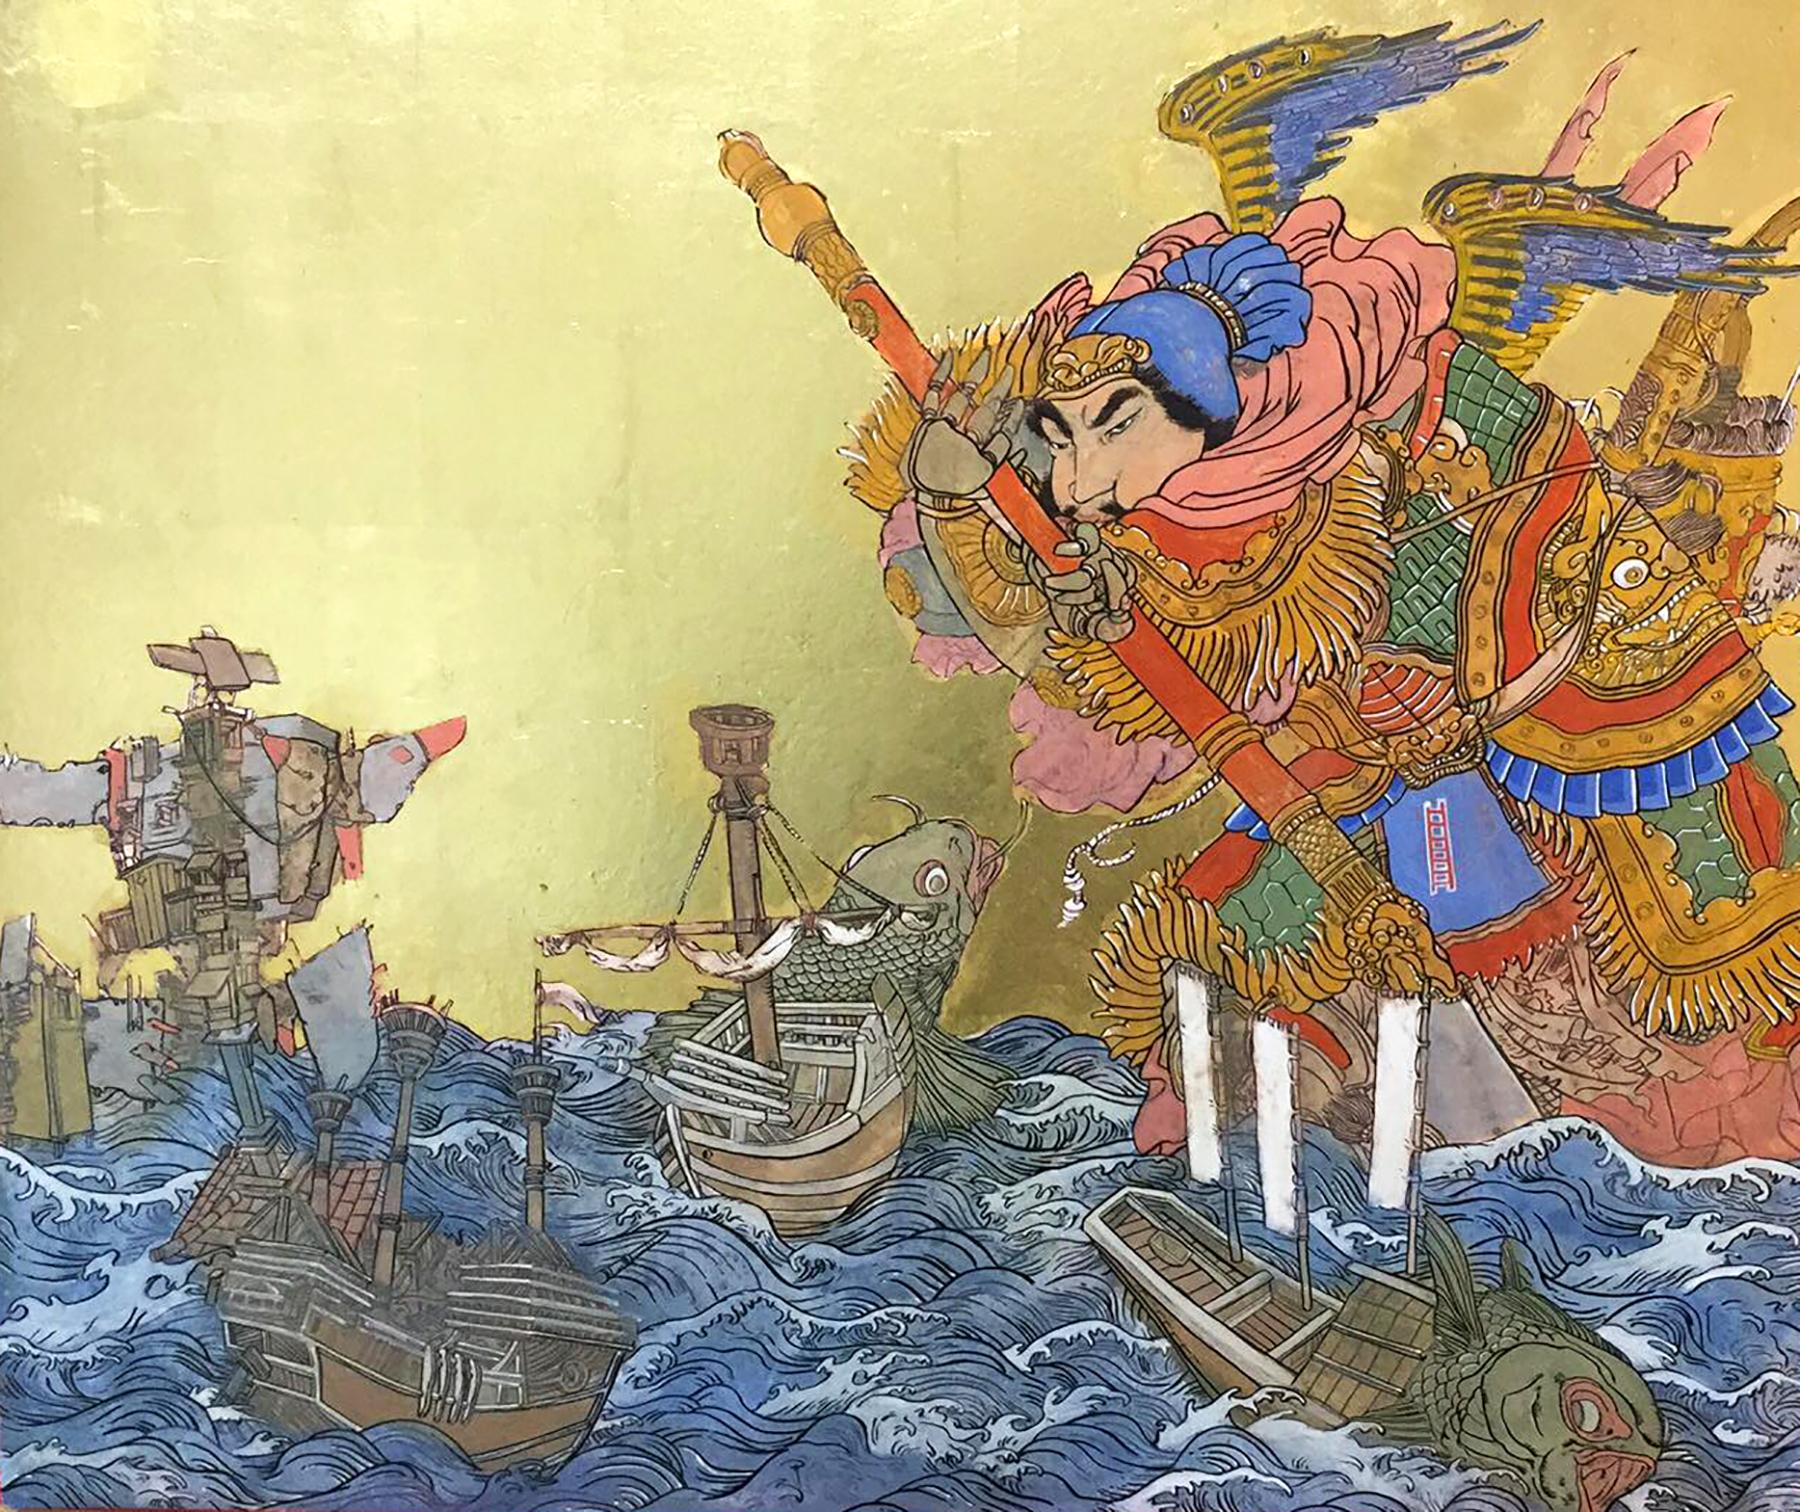 Giant At Sea, Asian Inspired Painting with Samurai, Ink, egg-tempera, gold leaf